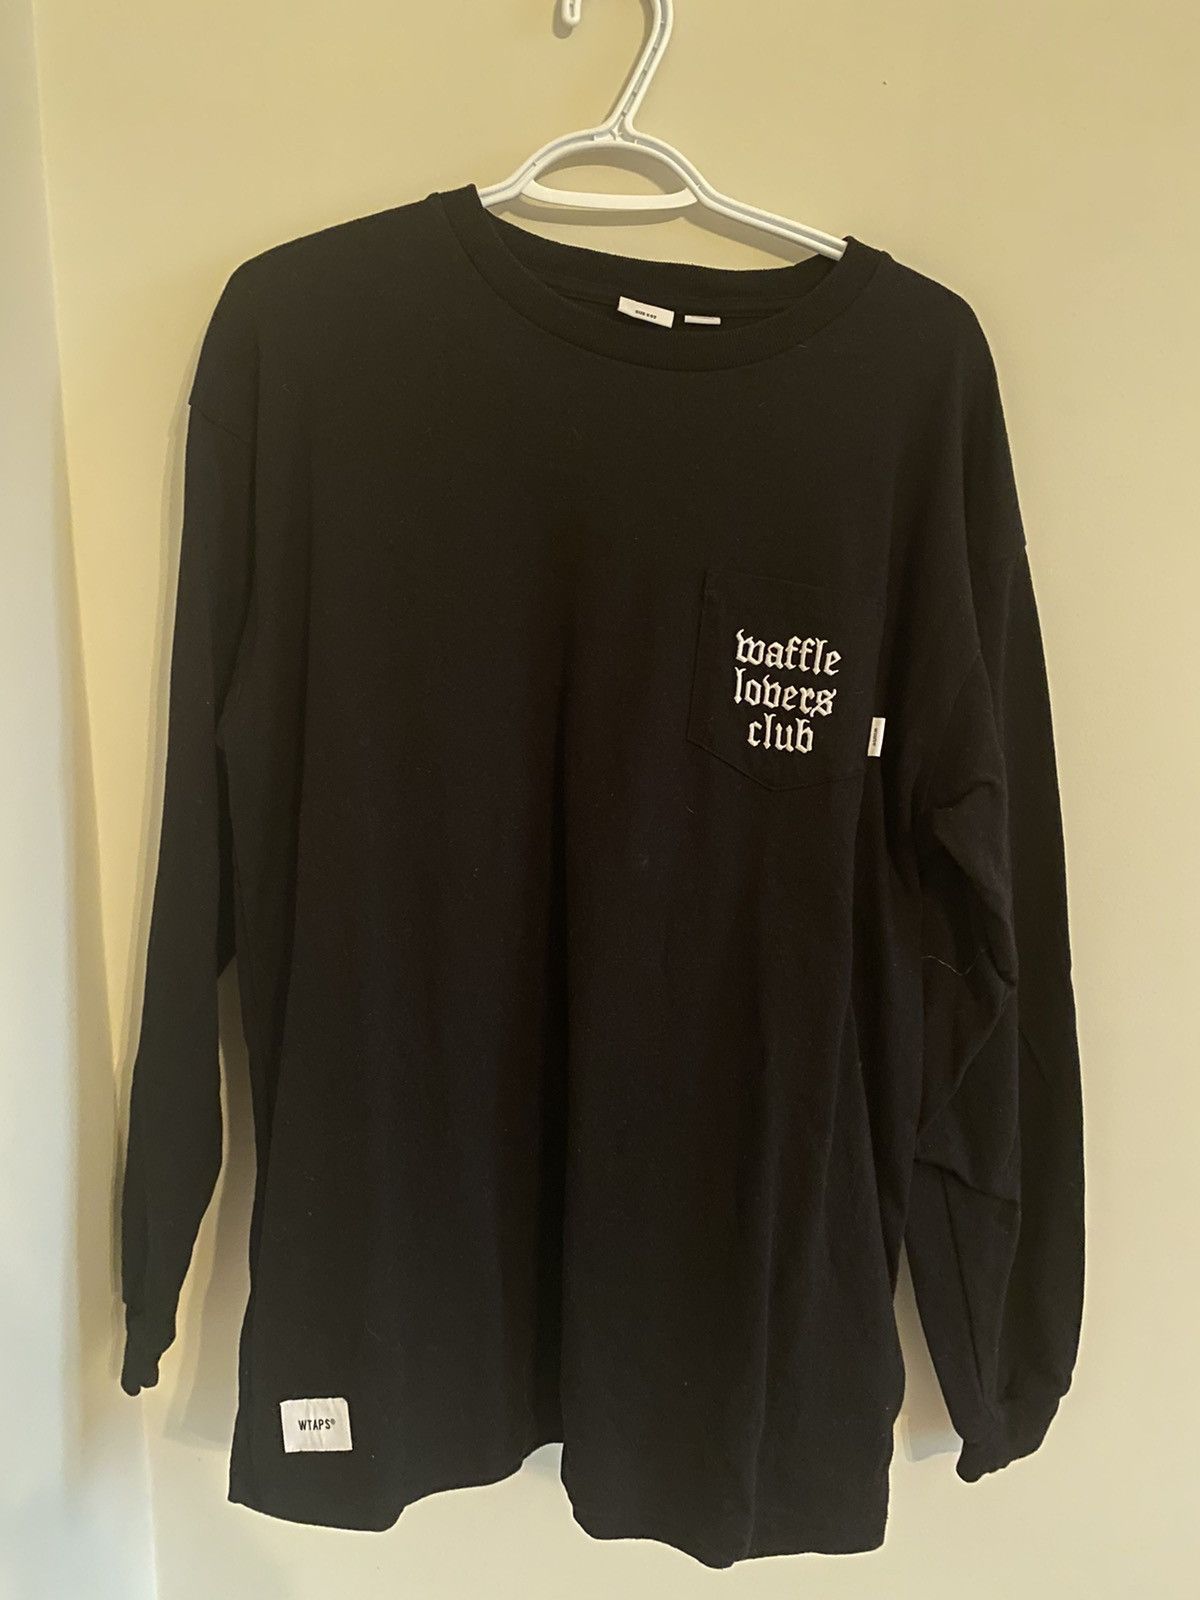 Vans Waffle Lovers Club Long Sleeve Black Size US M / EU 48-50 / 2 - 1 Preview